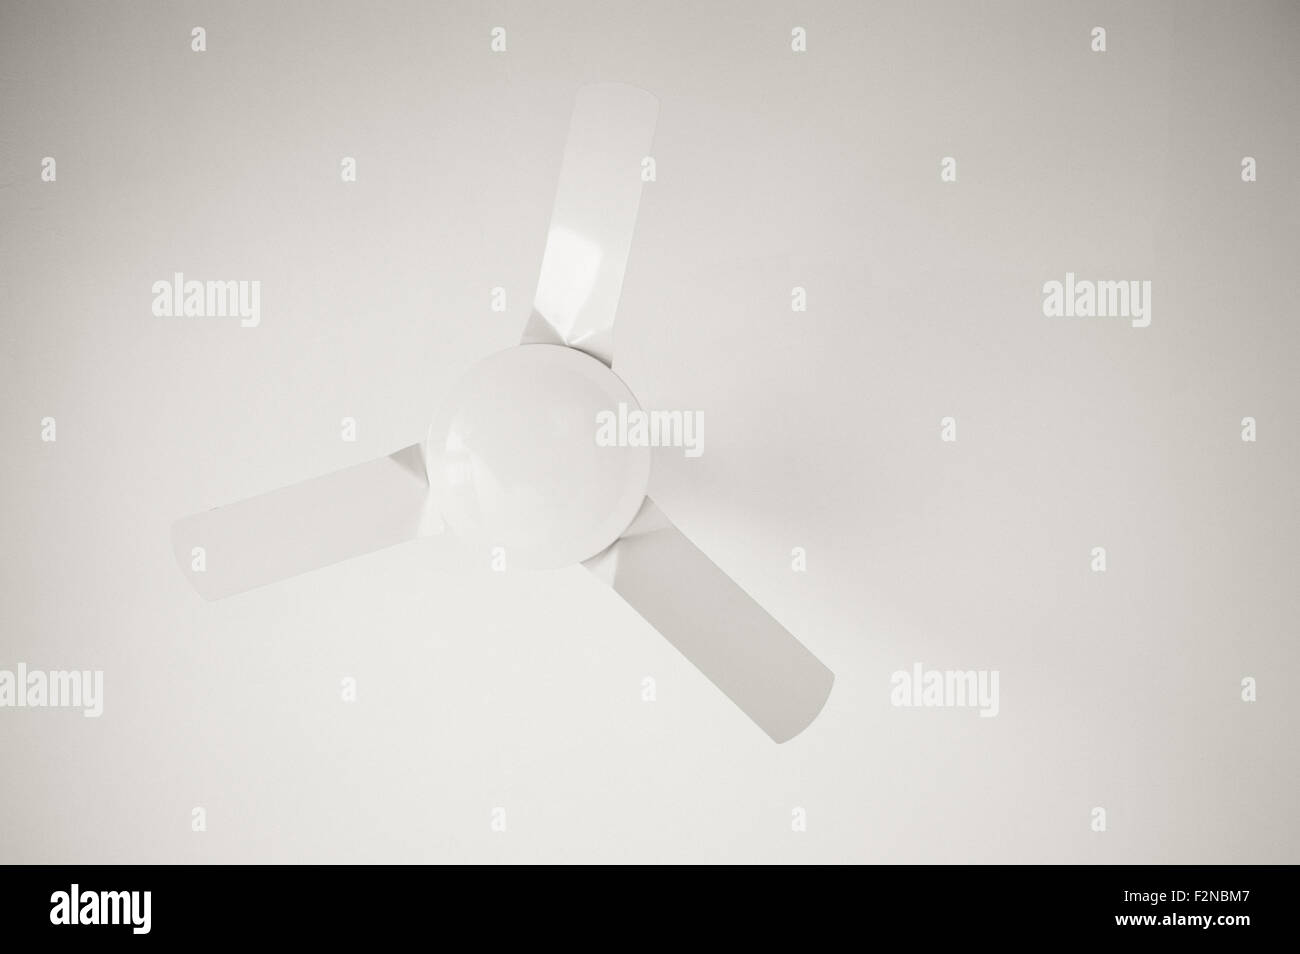 Fan on white ceiling in black and white with copy space Stock Photo